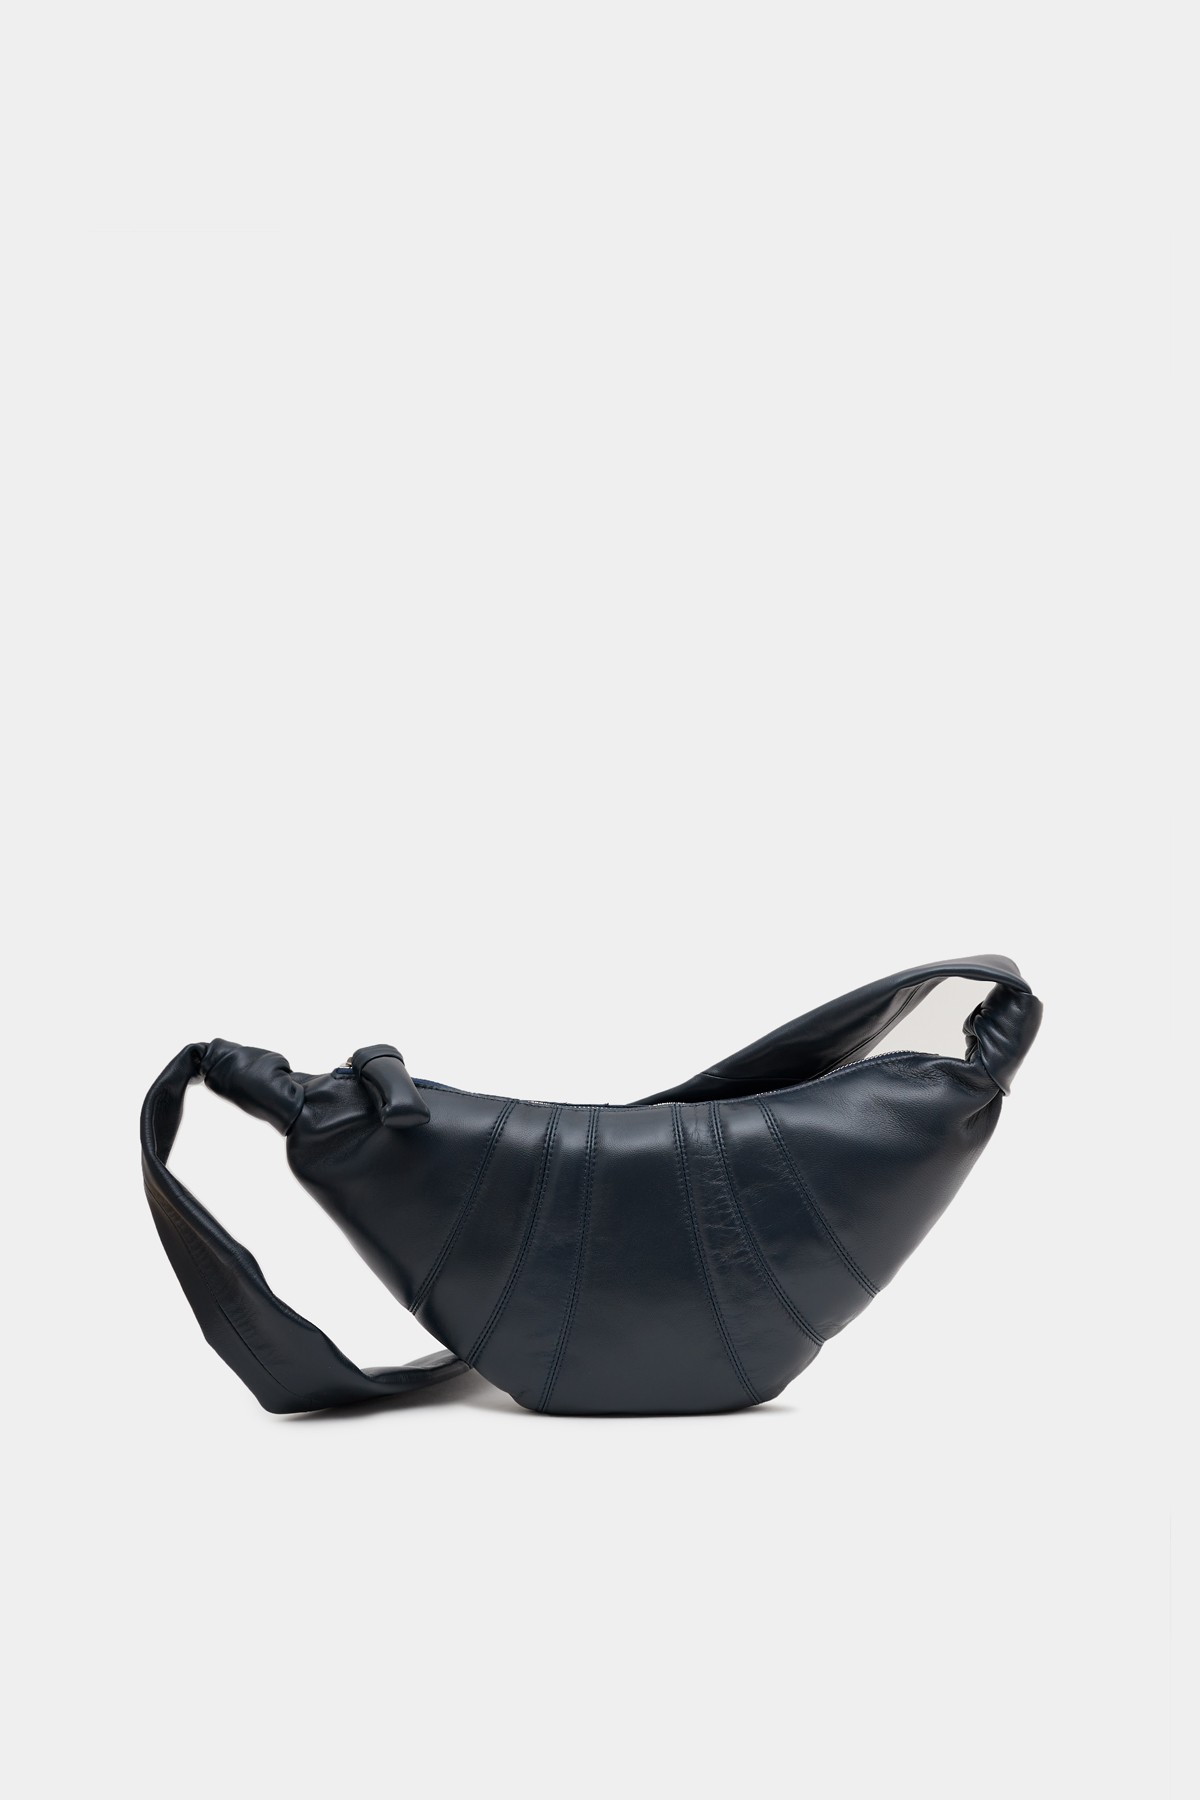 LEMAIRE MIDNIGHT BLUE SMALL CROISSANT BAG IAMNUE